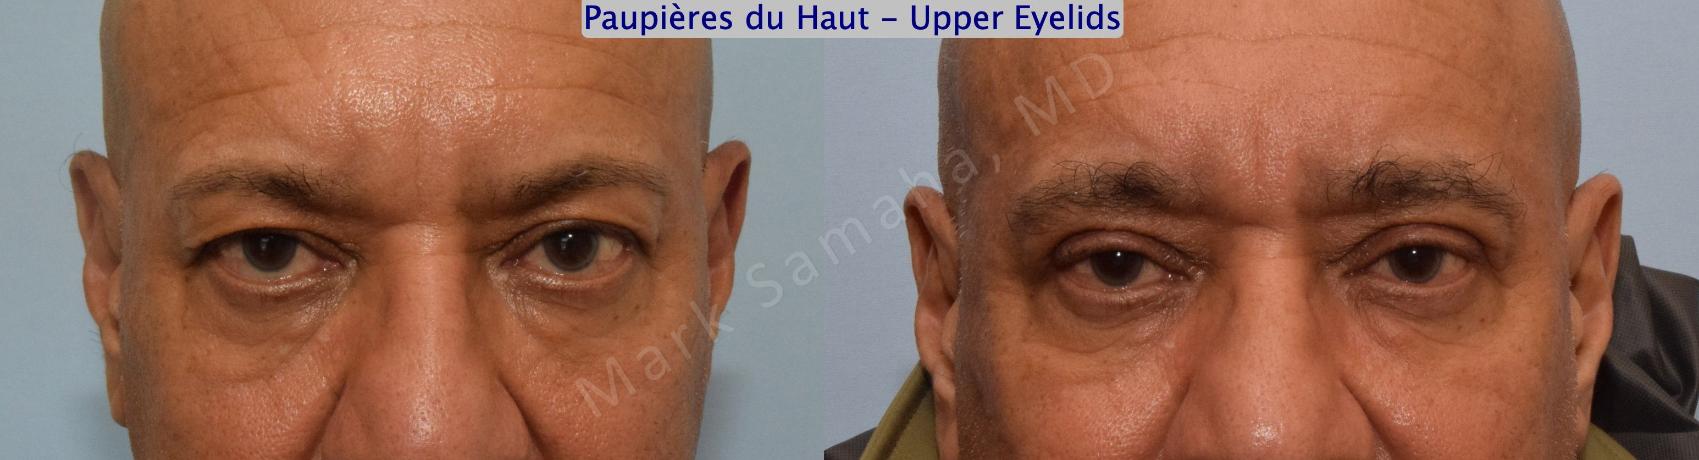 Before & After Blépharoplastie / Blepharoplasty Case 143 Front View in Montreal, QC